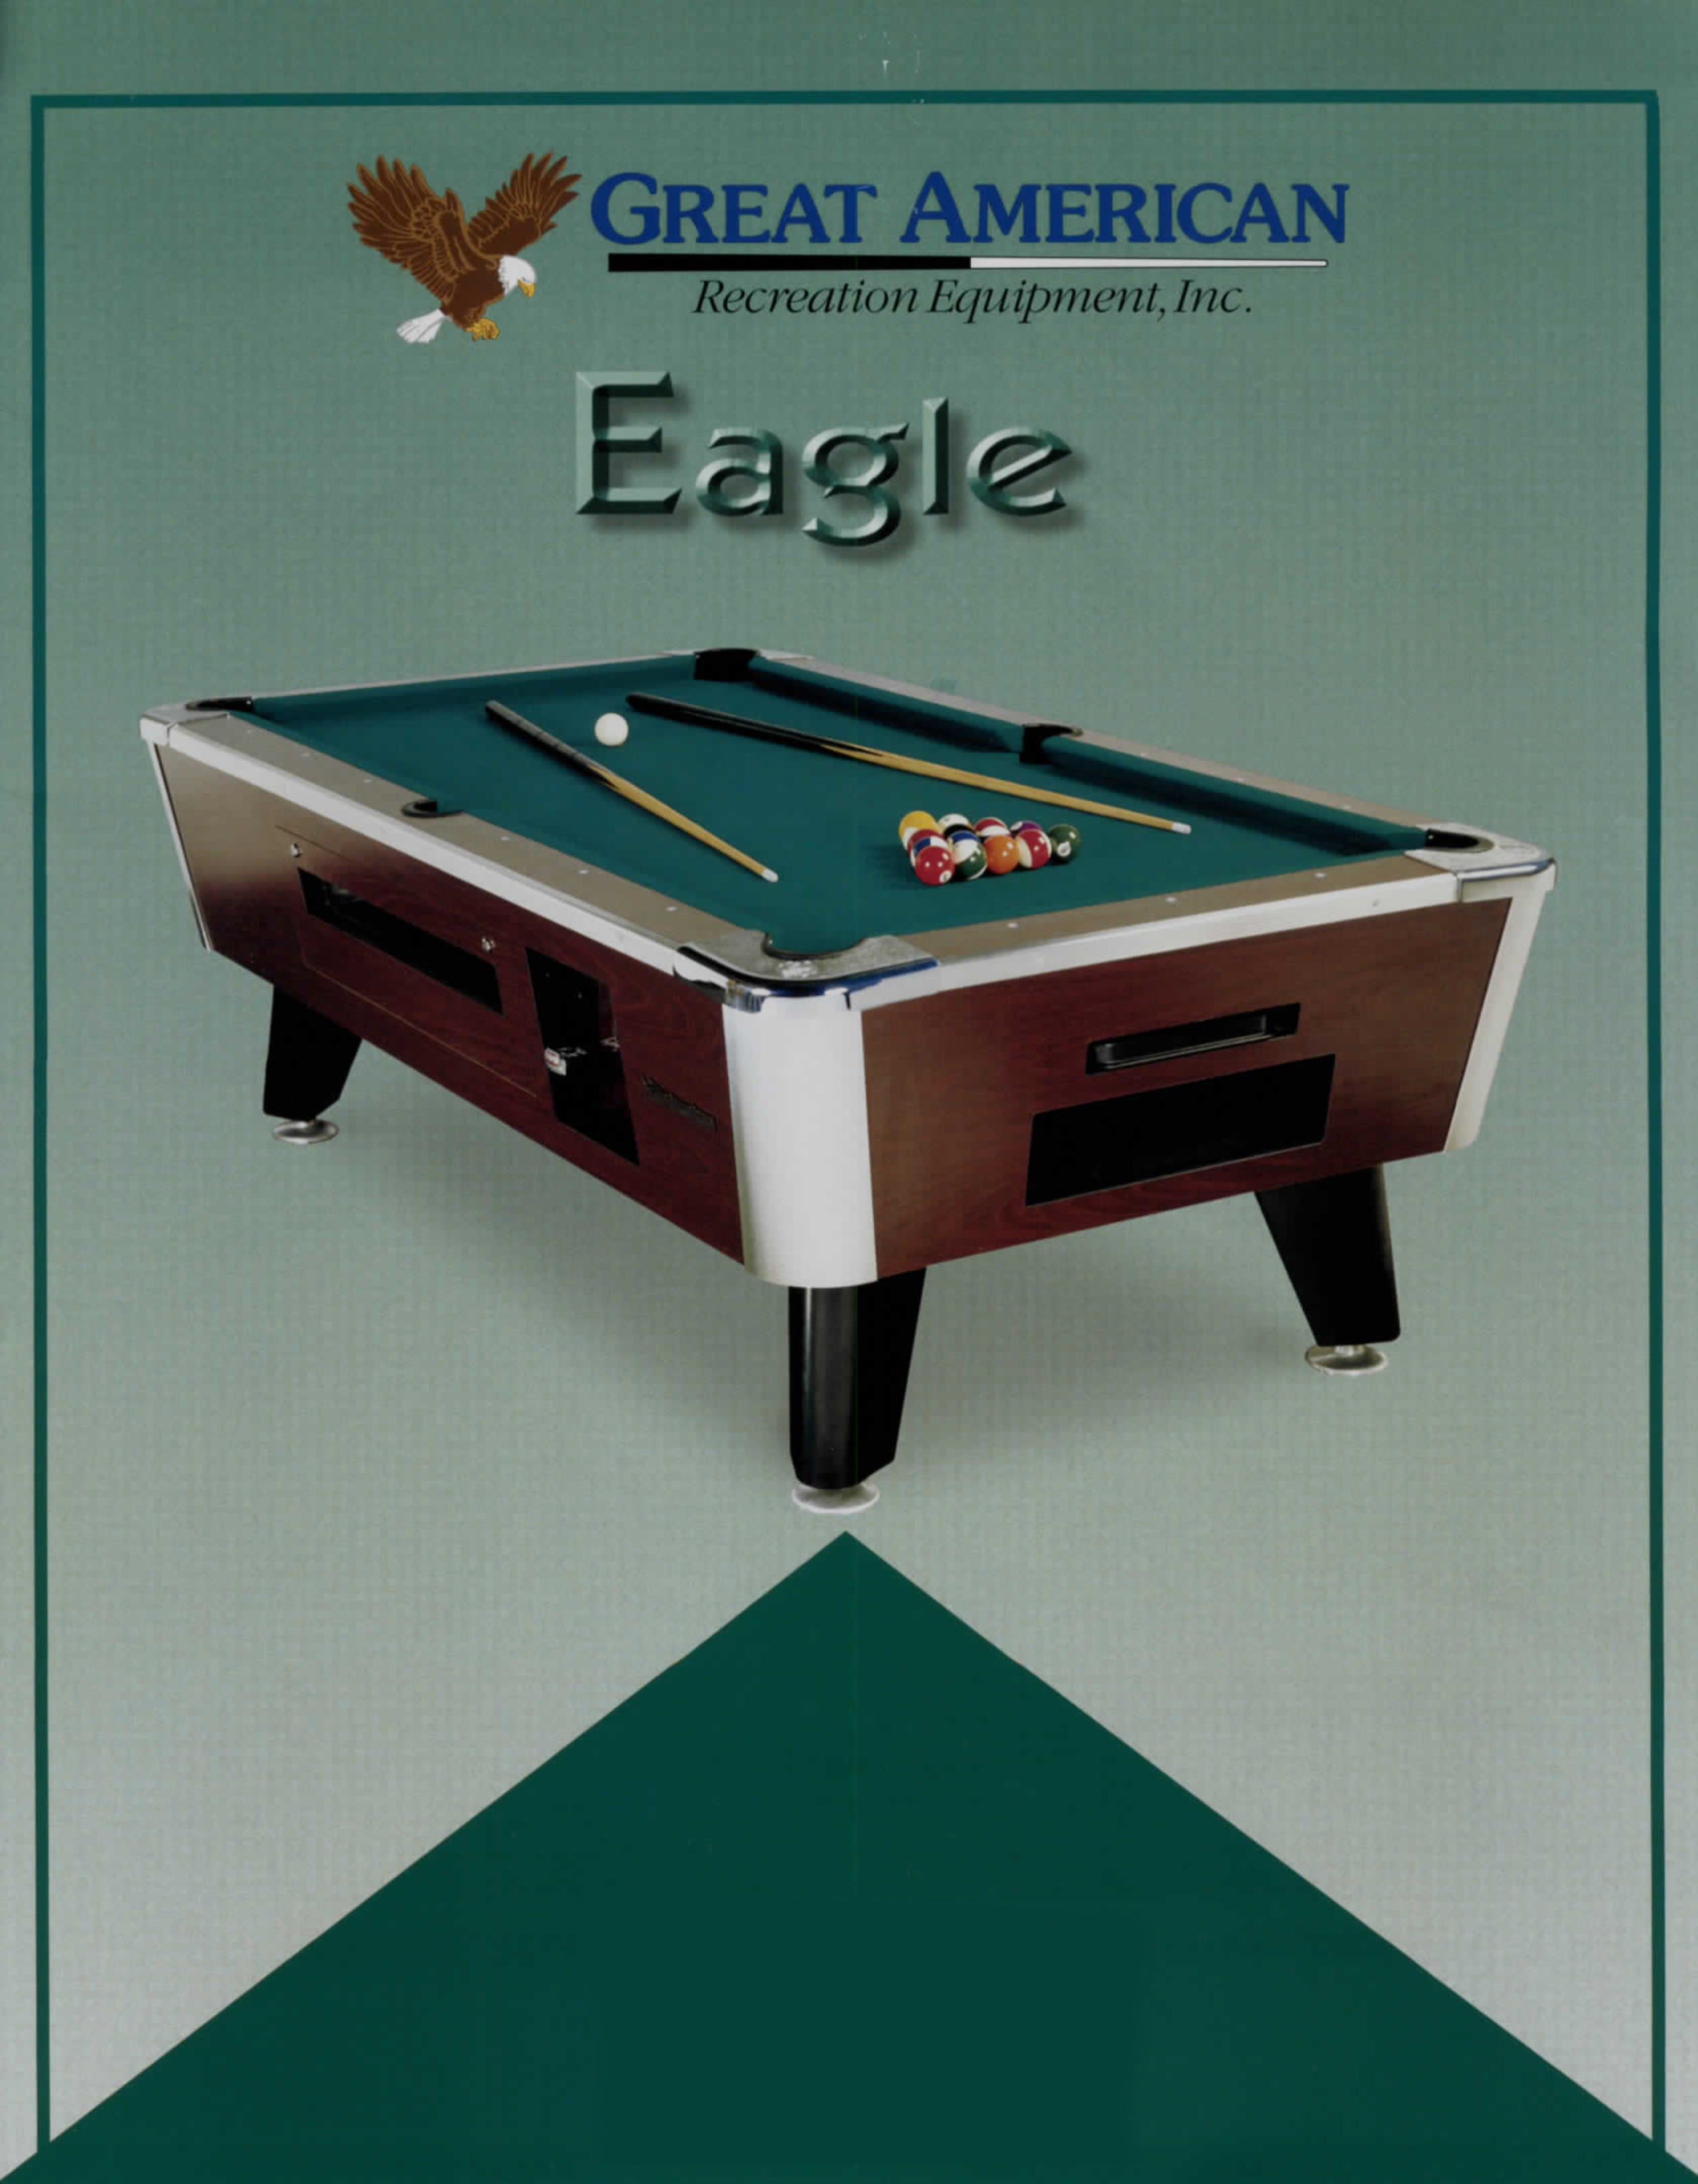 Great American Eagle Coin-Op Pool table 1995